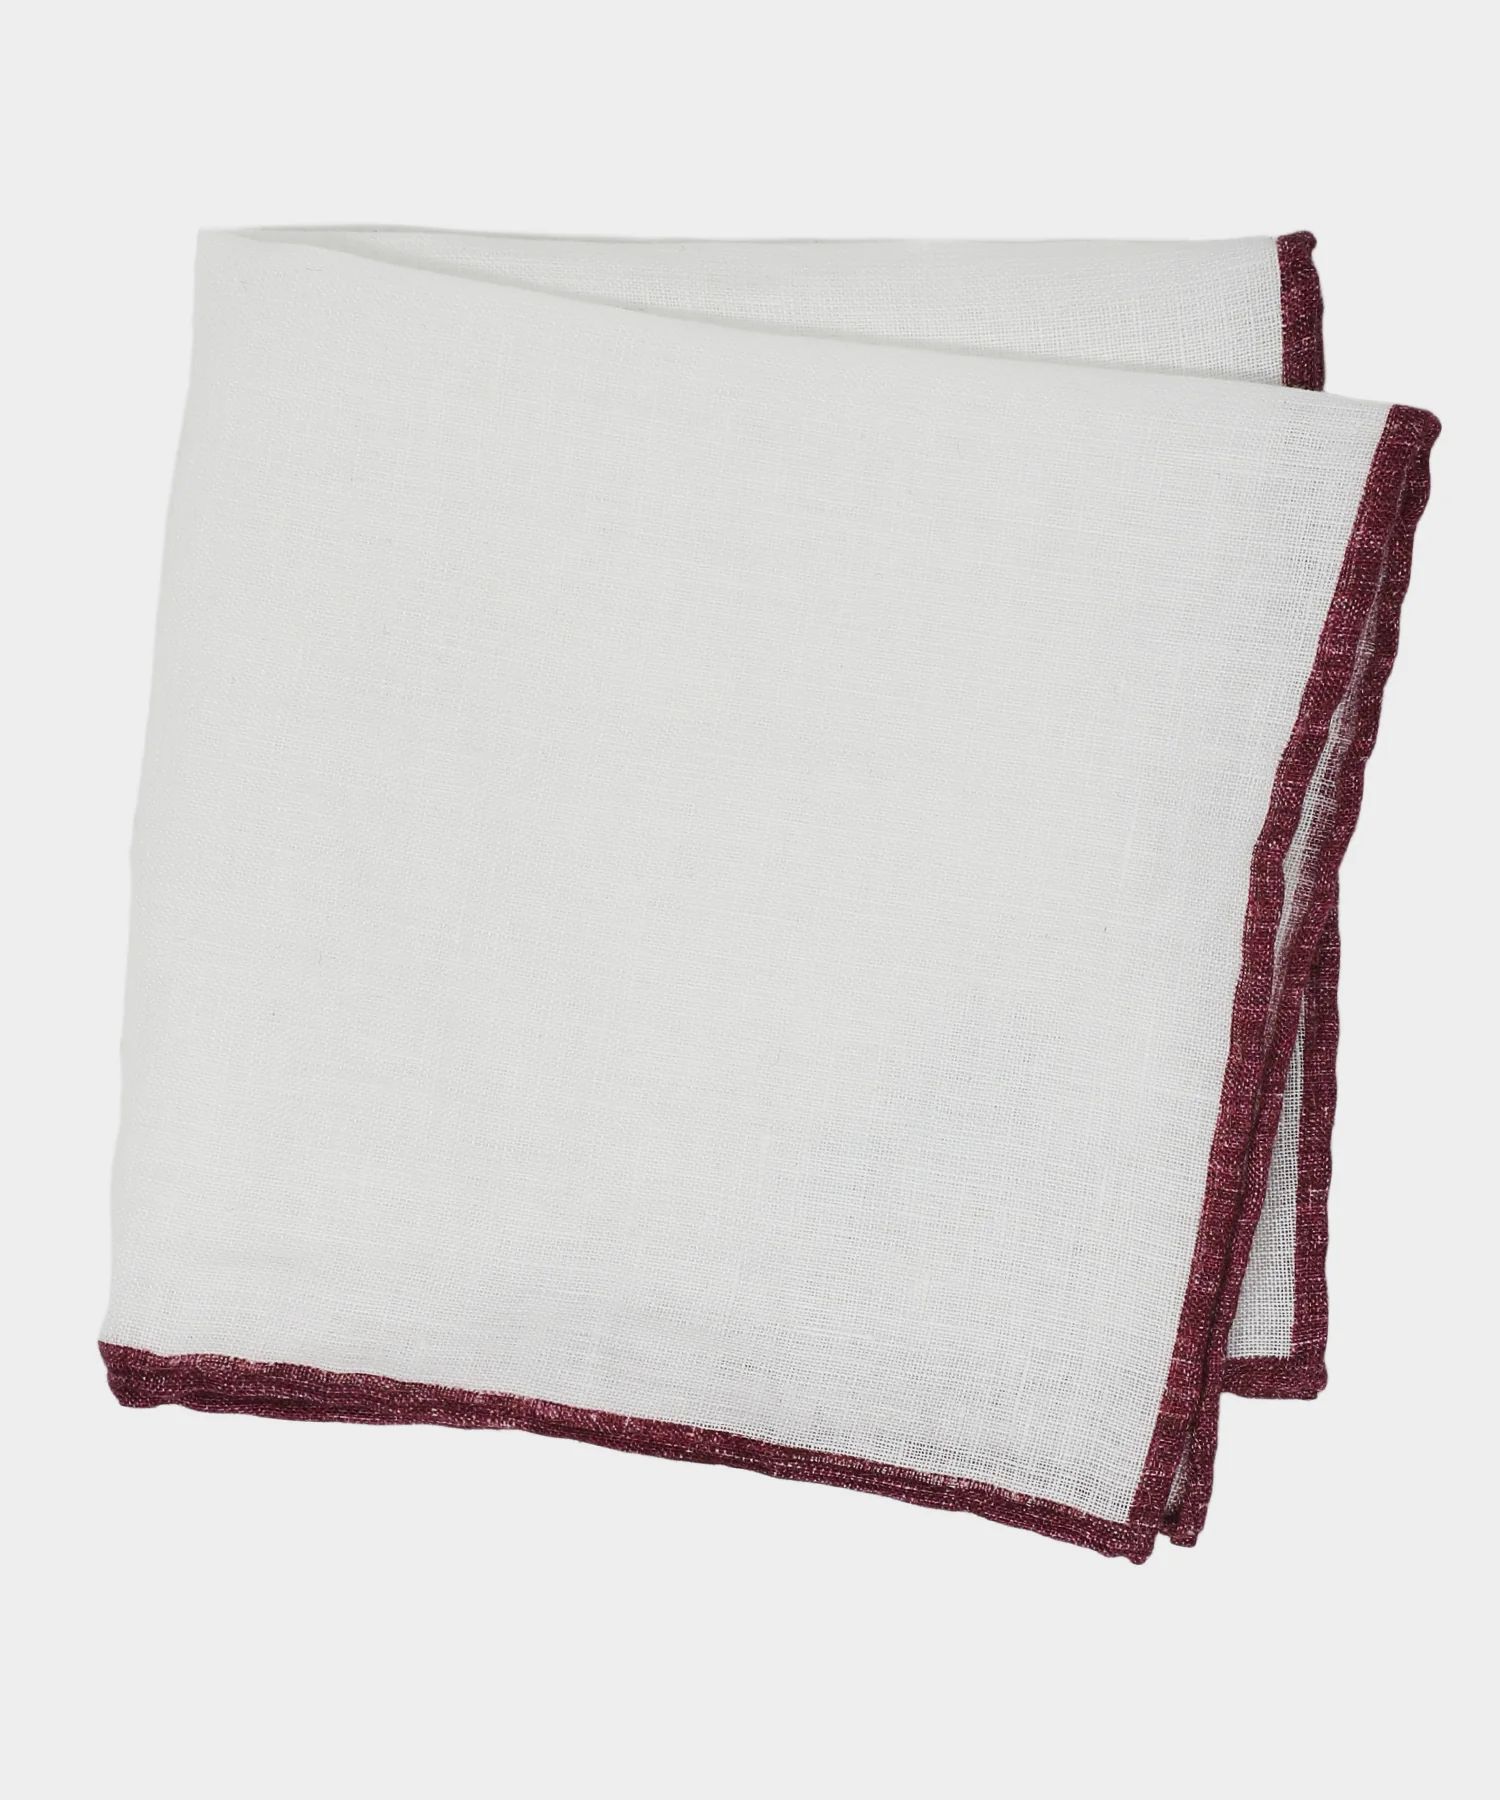 Italian Tipped Linen Pocket Square in Maroon | Todd Snyder